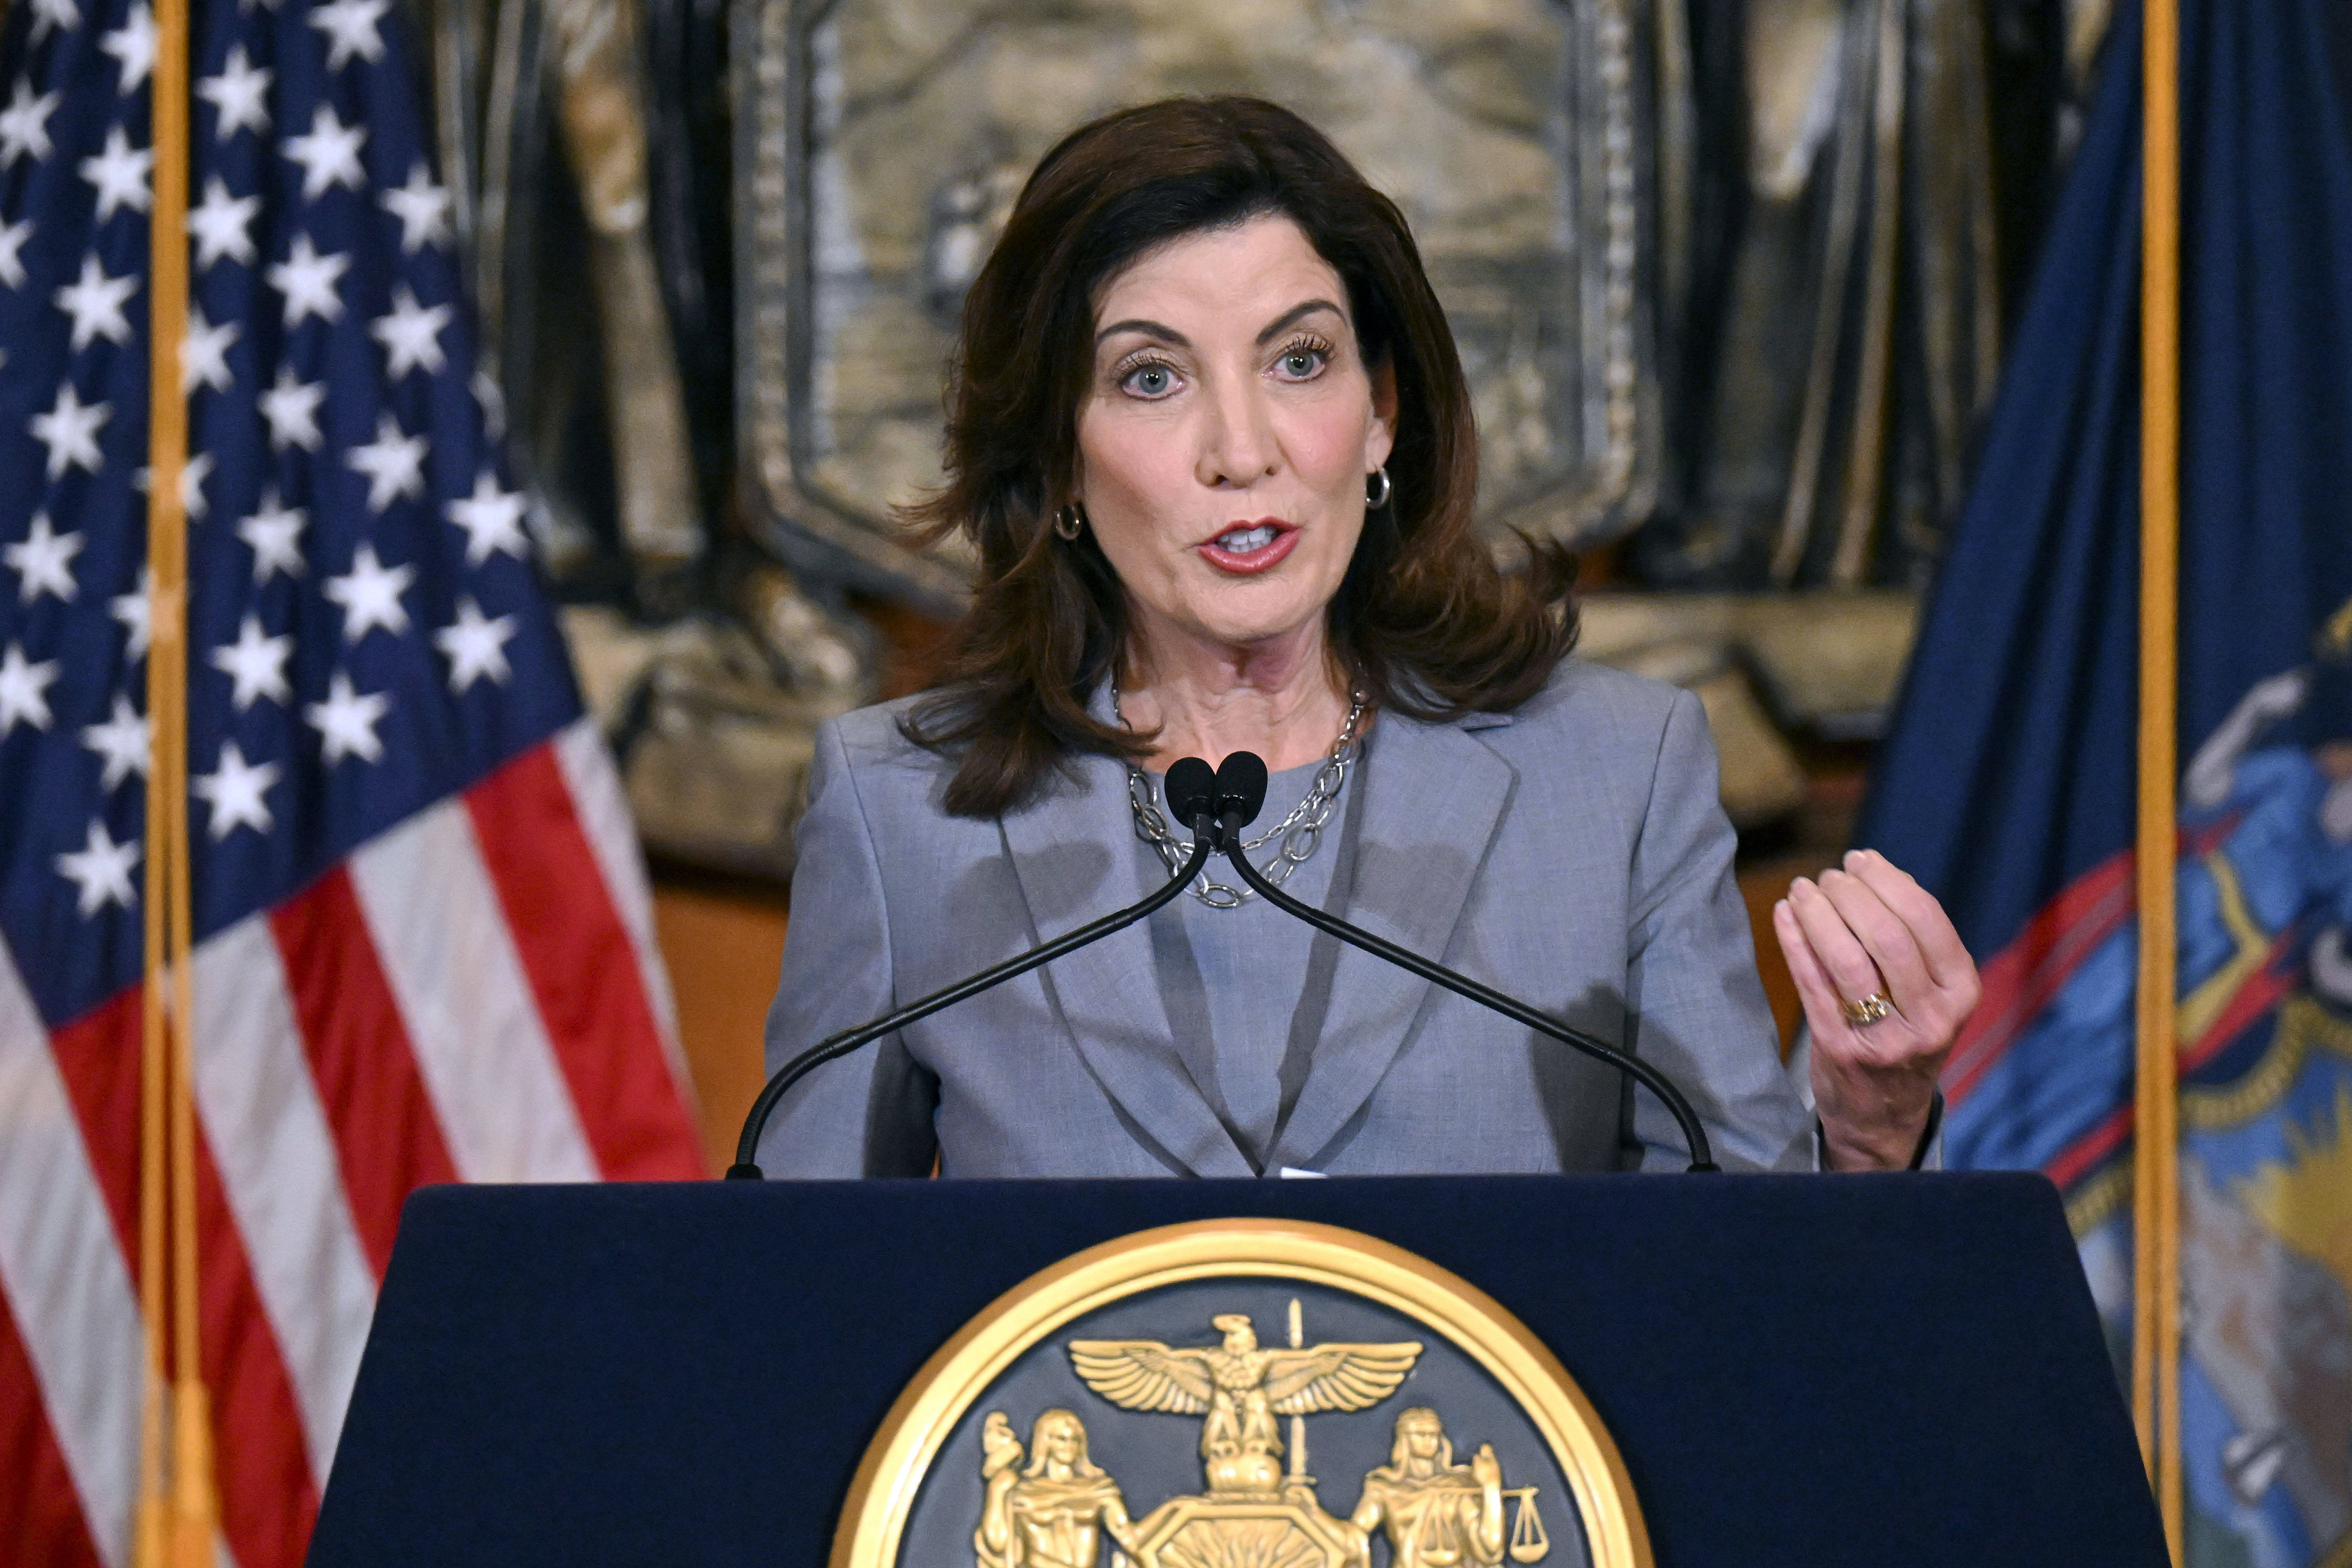 Kathy Hochul builds lead over Lee Zeldin in race for NY governor, poll says  